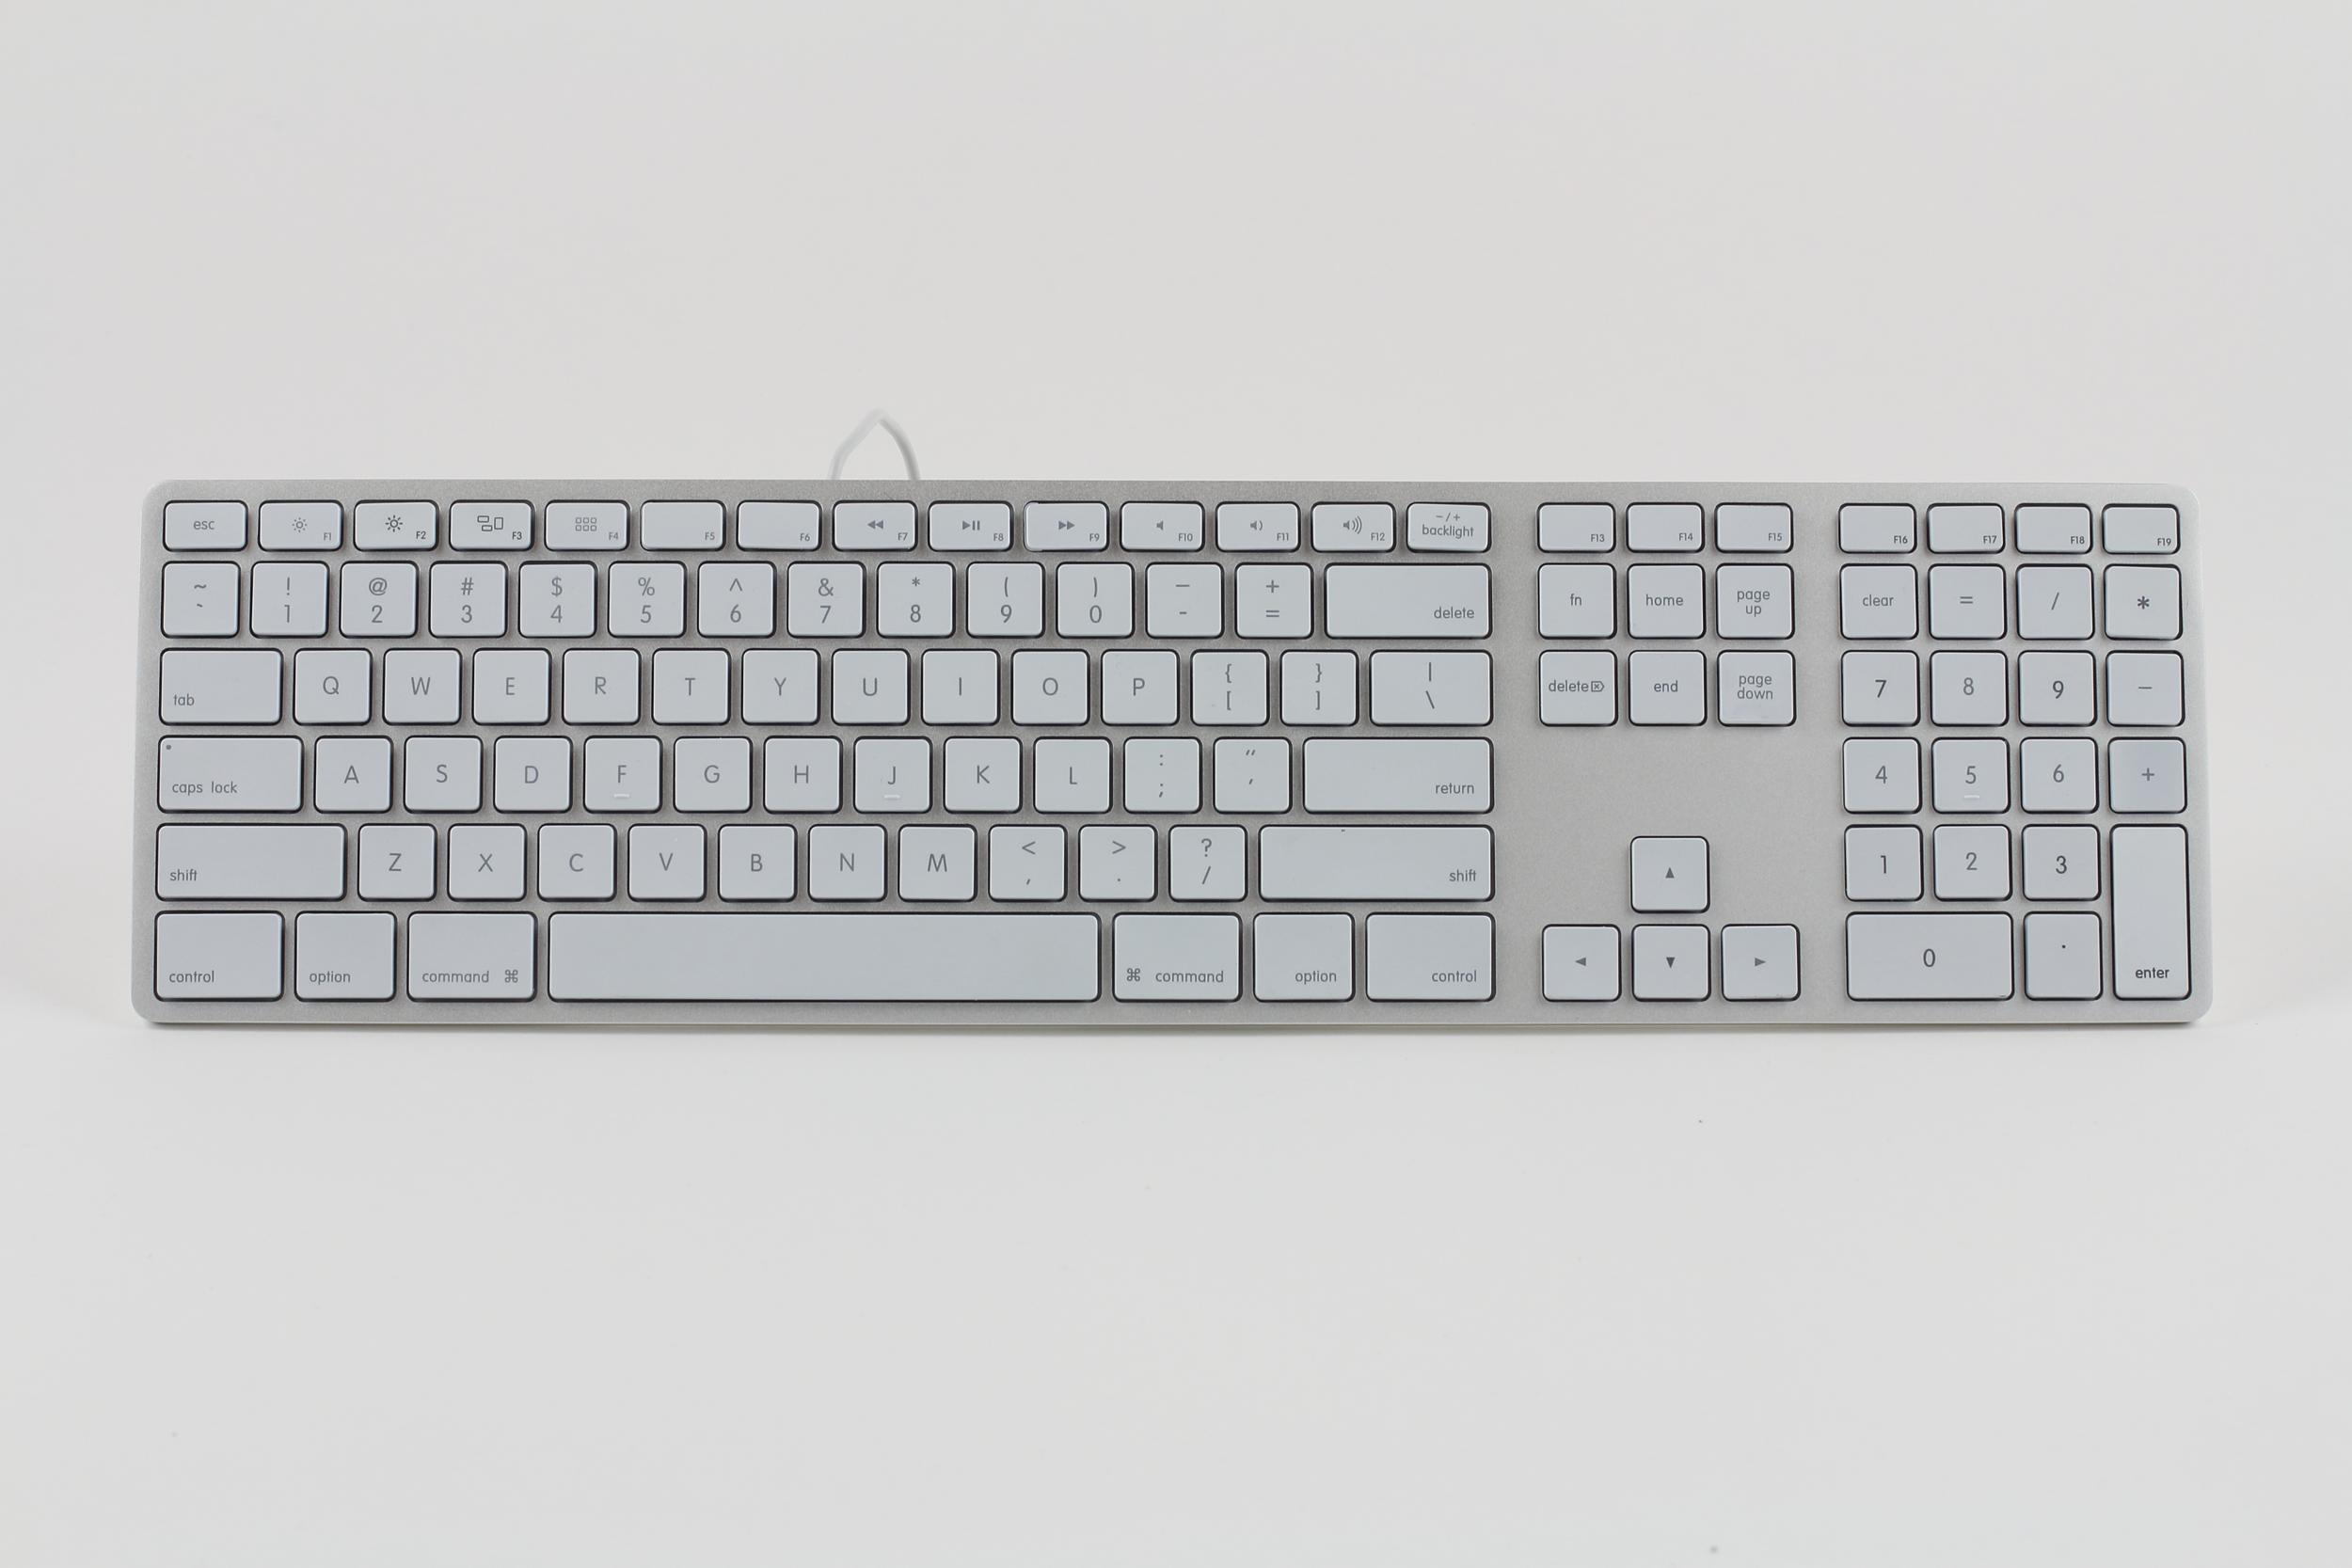 Matias Aluminum Extended USB Keyboard with Backlight GERMAN for Mac OS - Silver with white keys